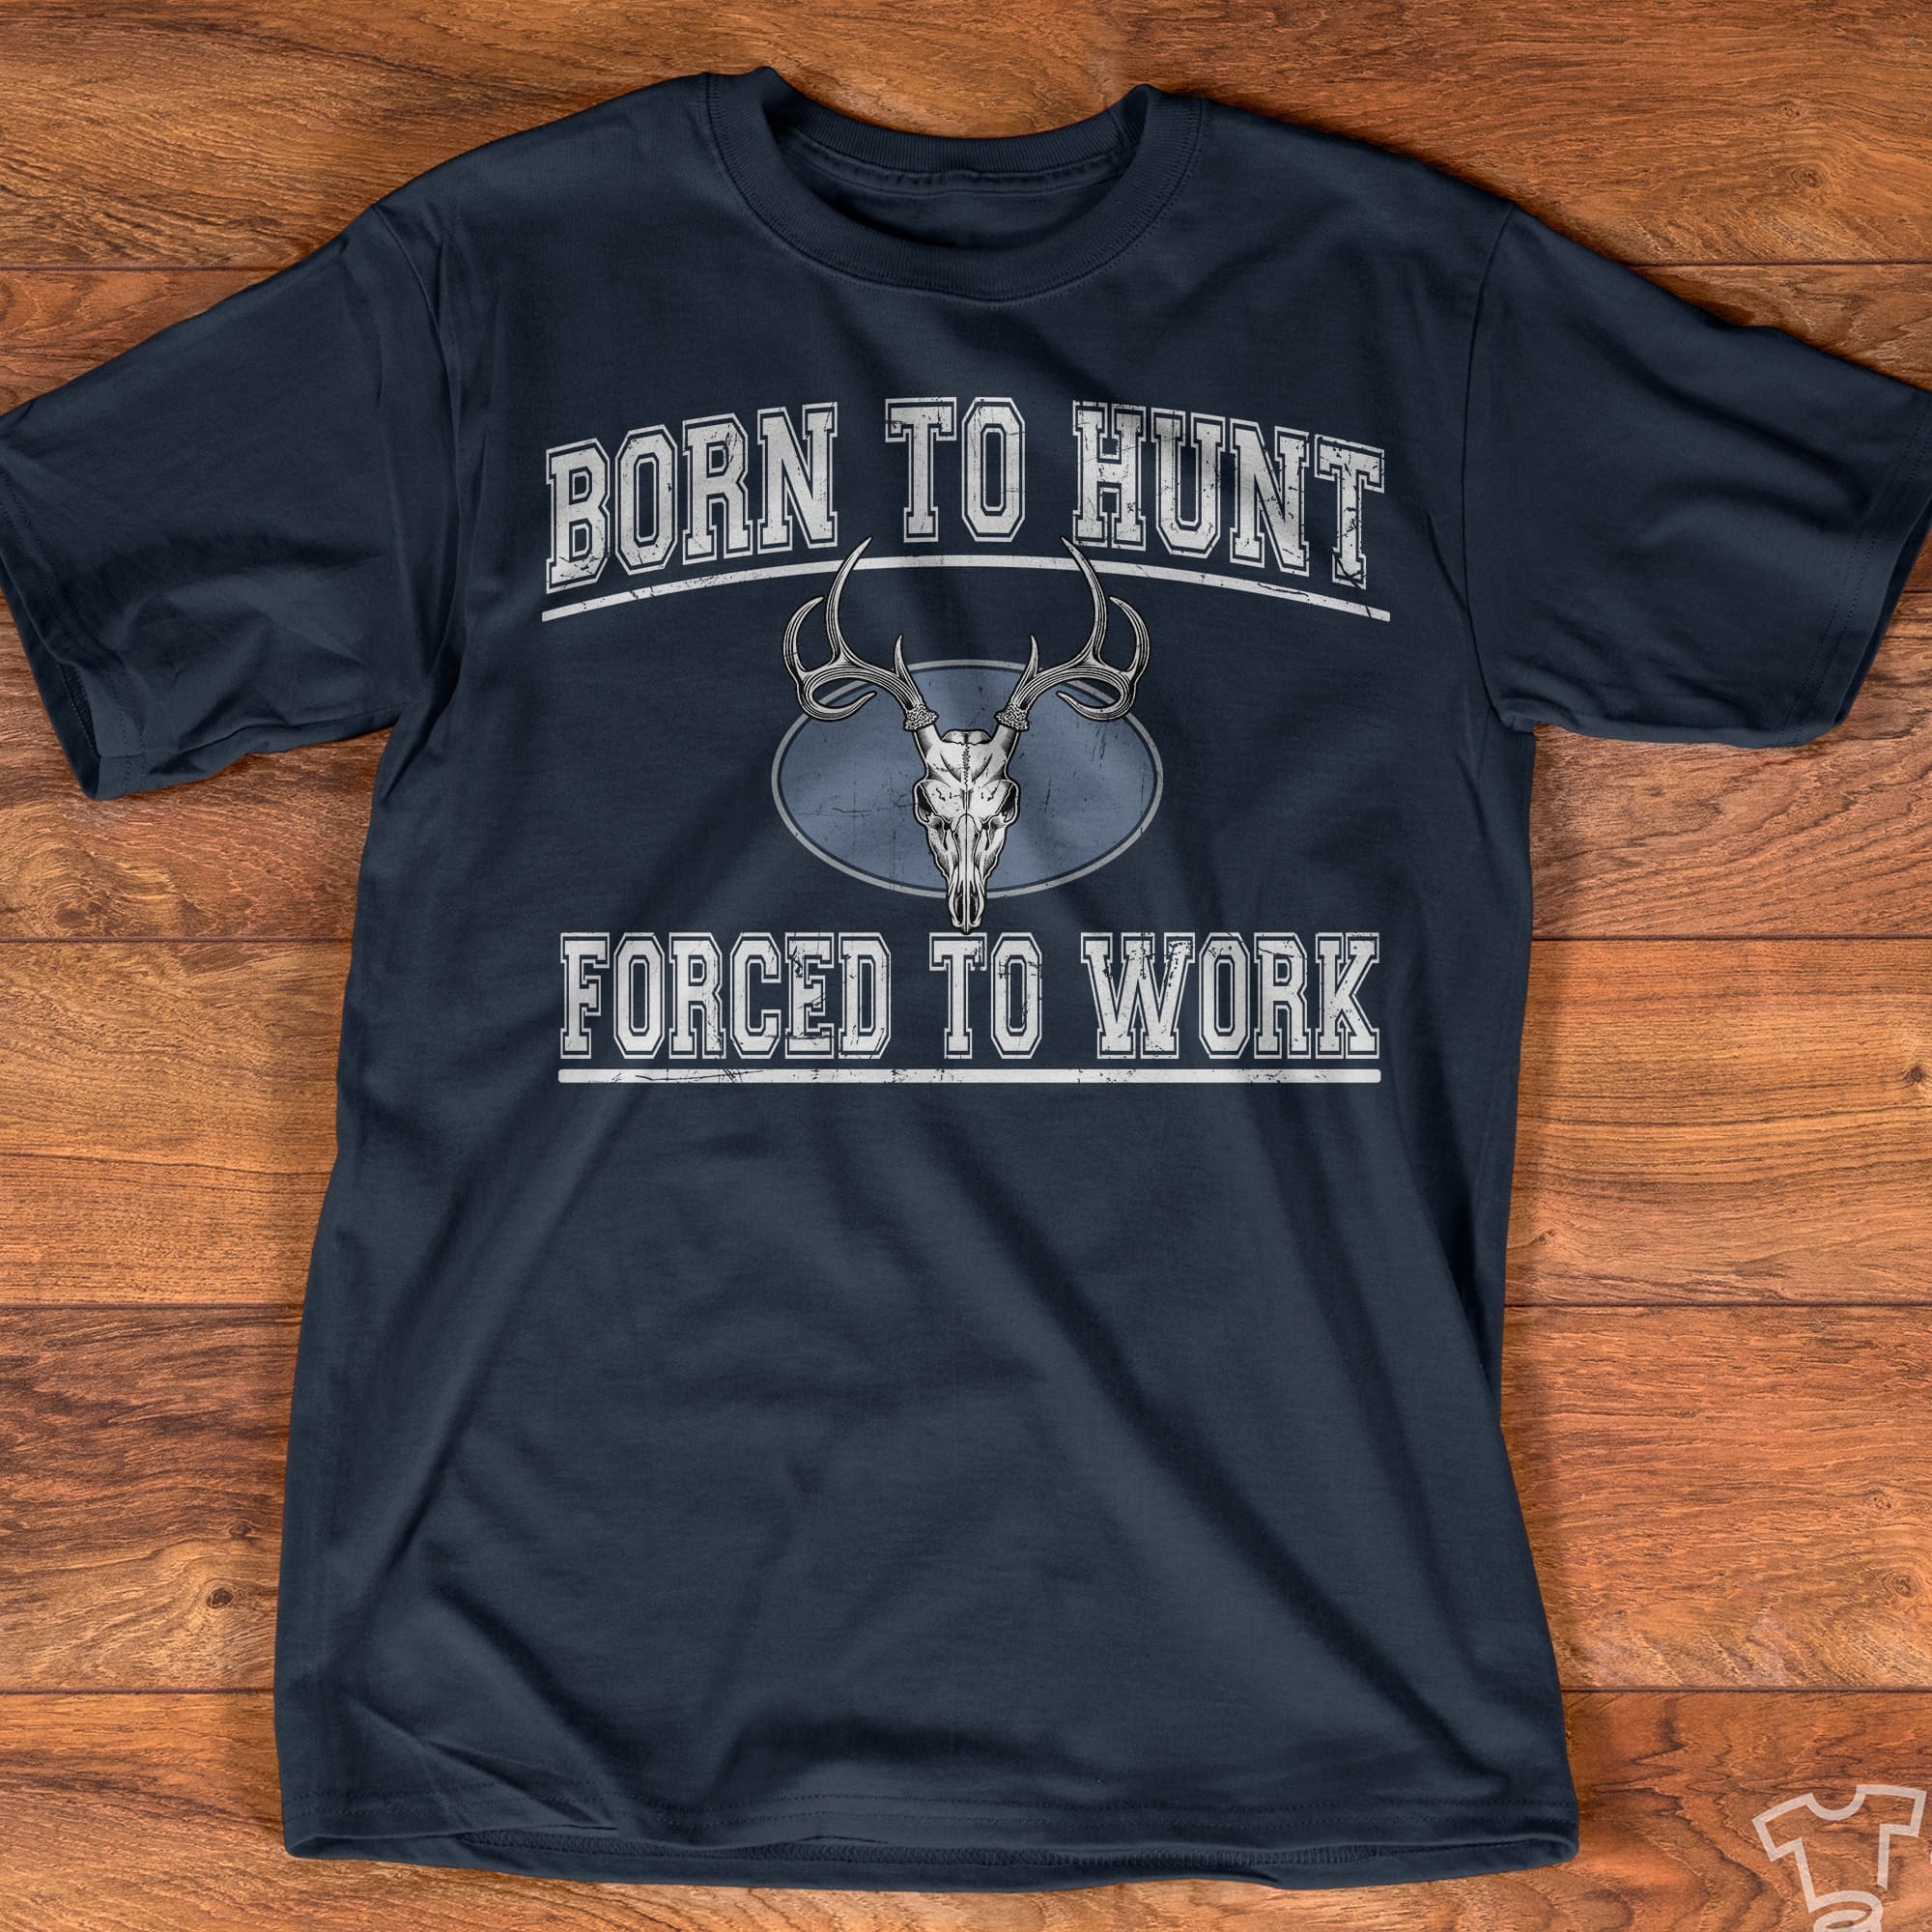 Born to hunt, forced to work - Deer hunter T-shirt